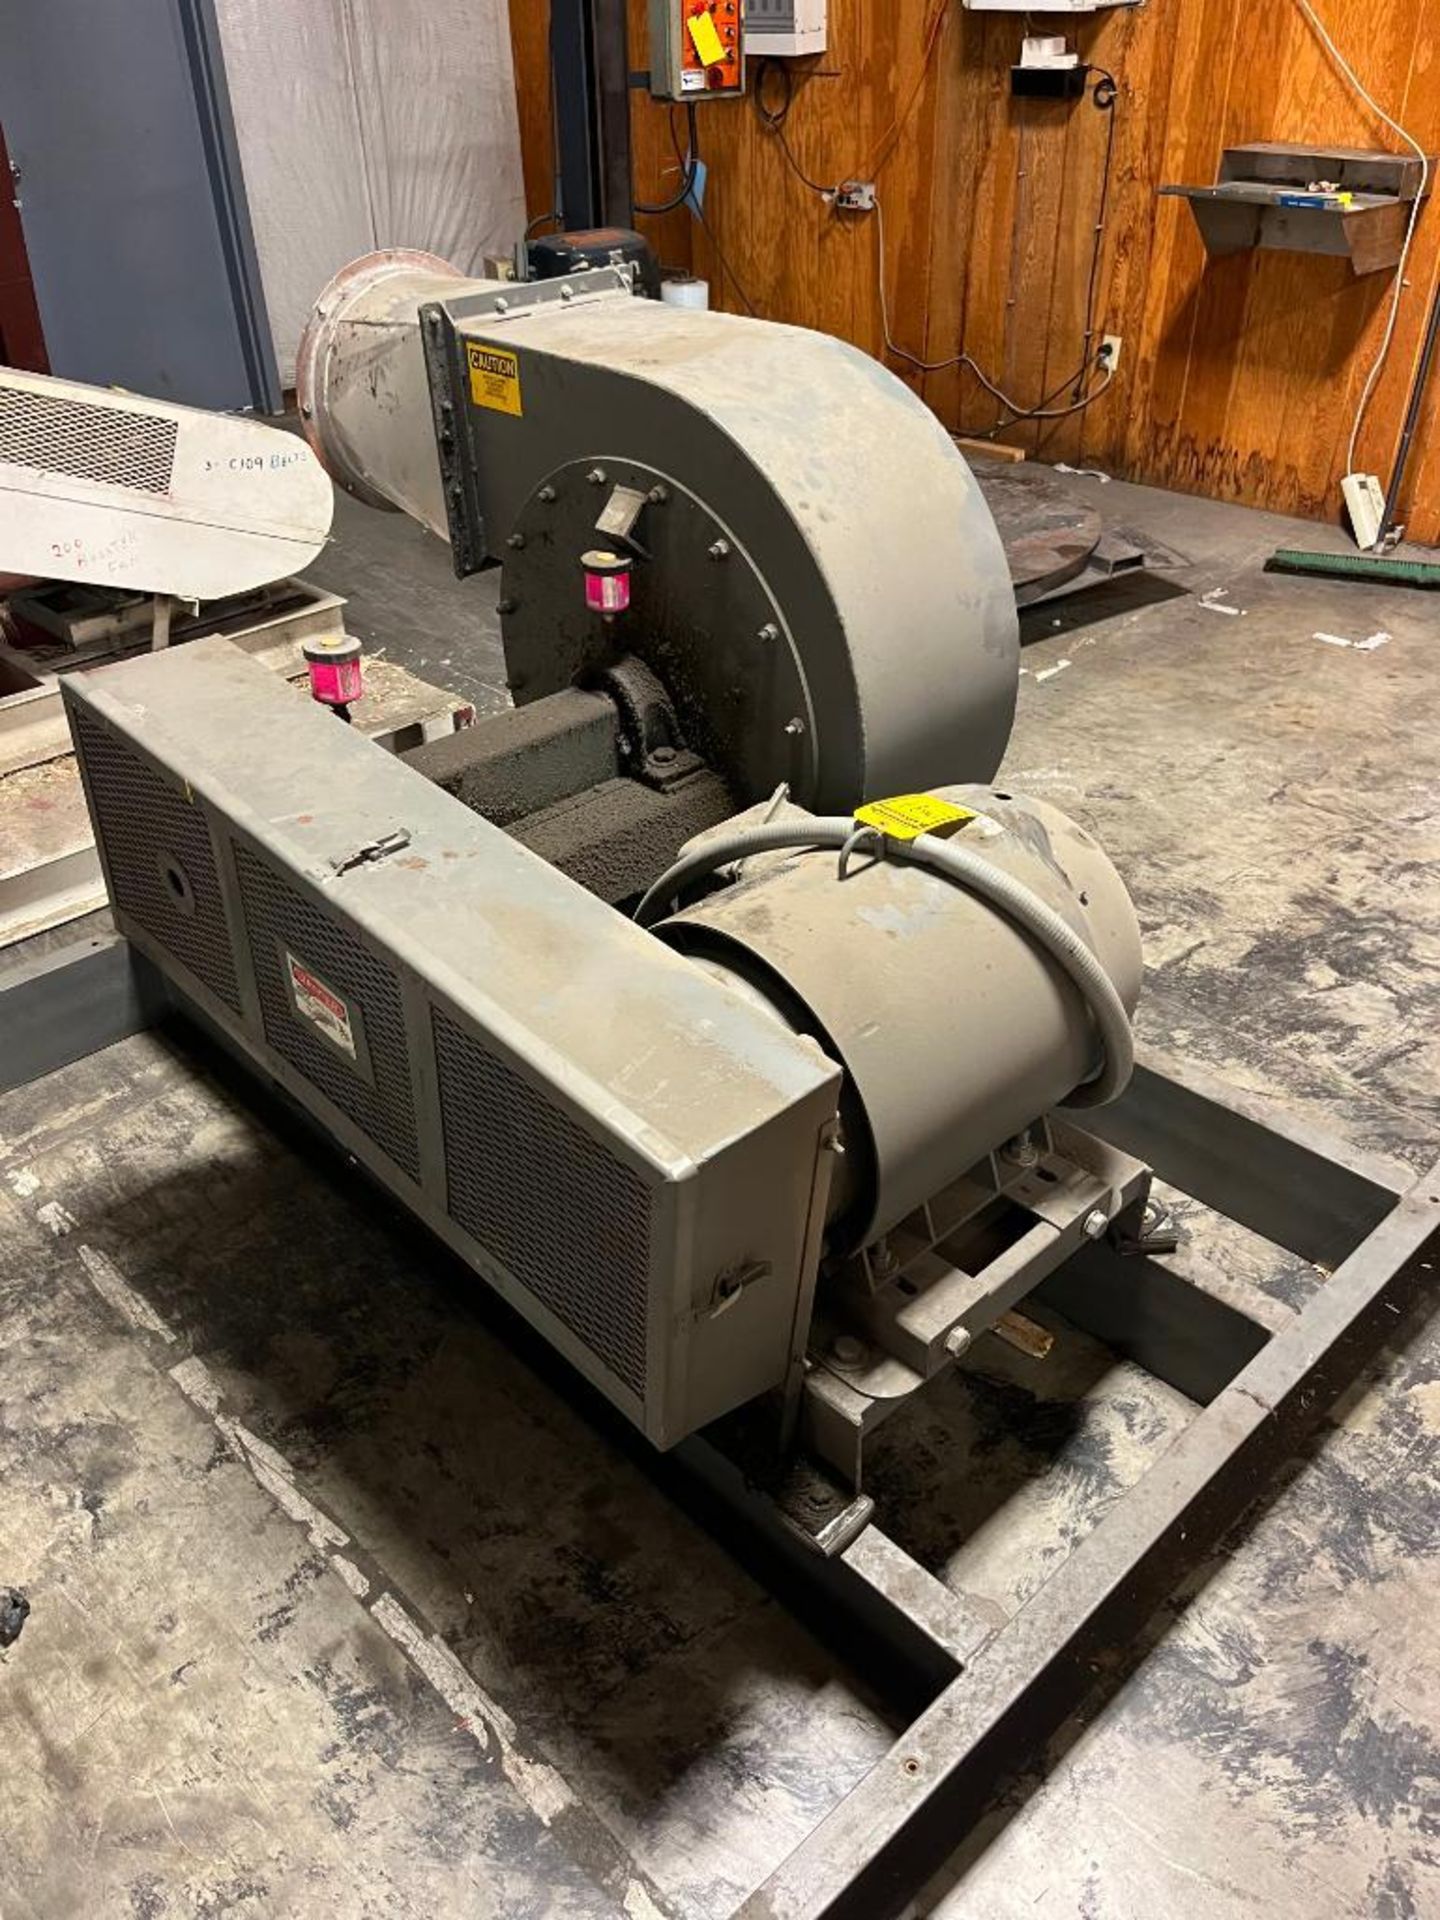 GFP 40 HP Y-Top Horizontal Discharge Blower, Model 115019R, S/N 0604018G, 2,000 RPM, 15" Dia. Discha - Image 3 of 6